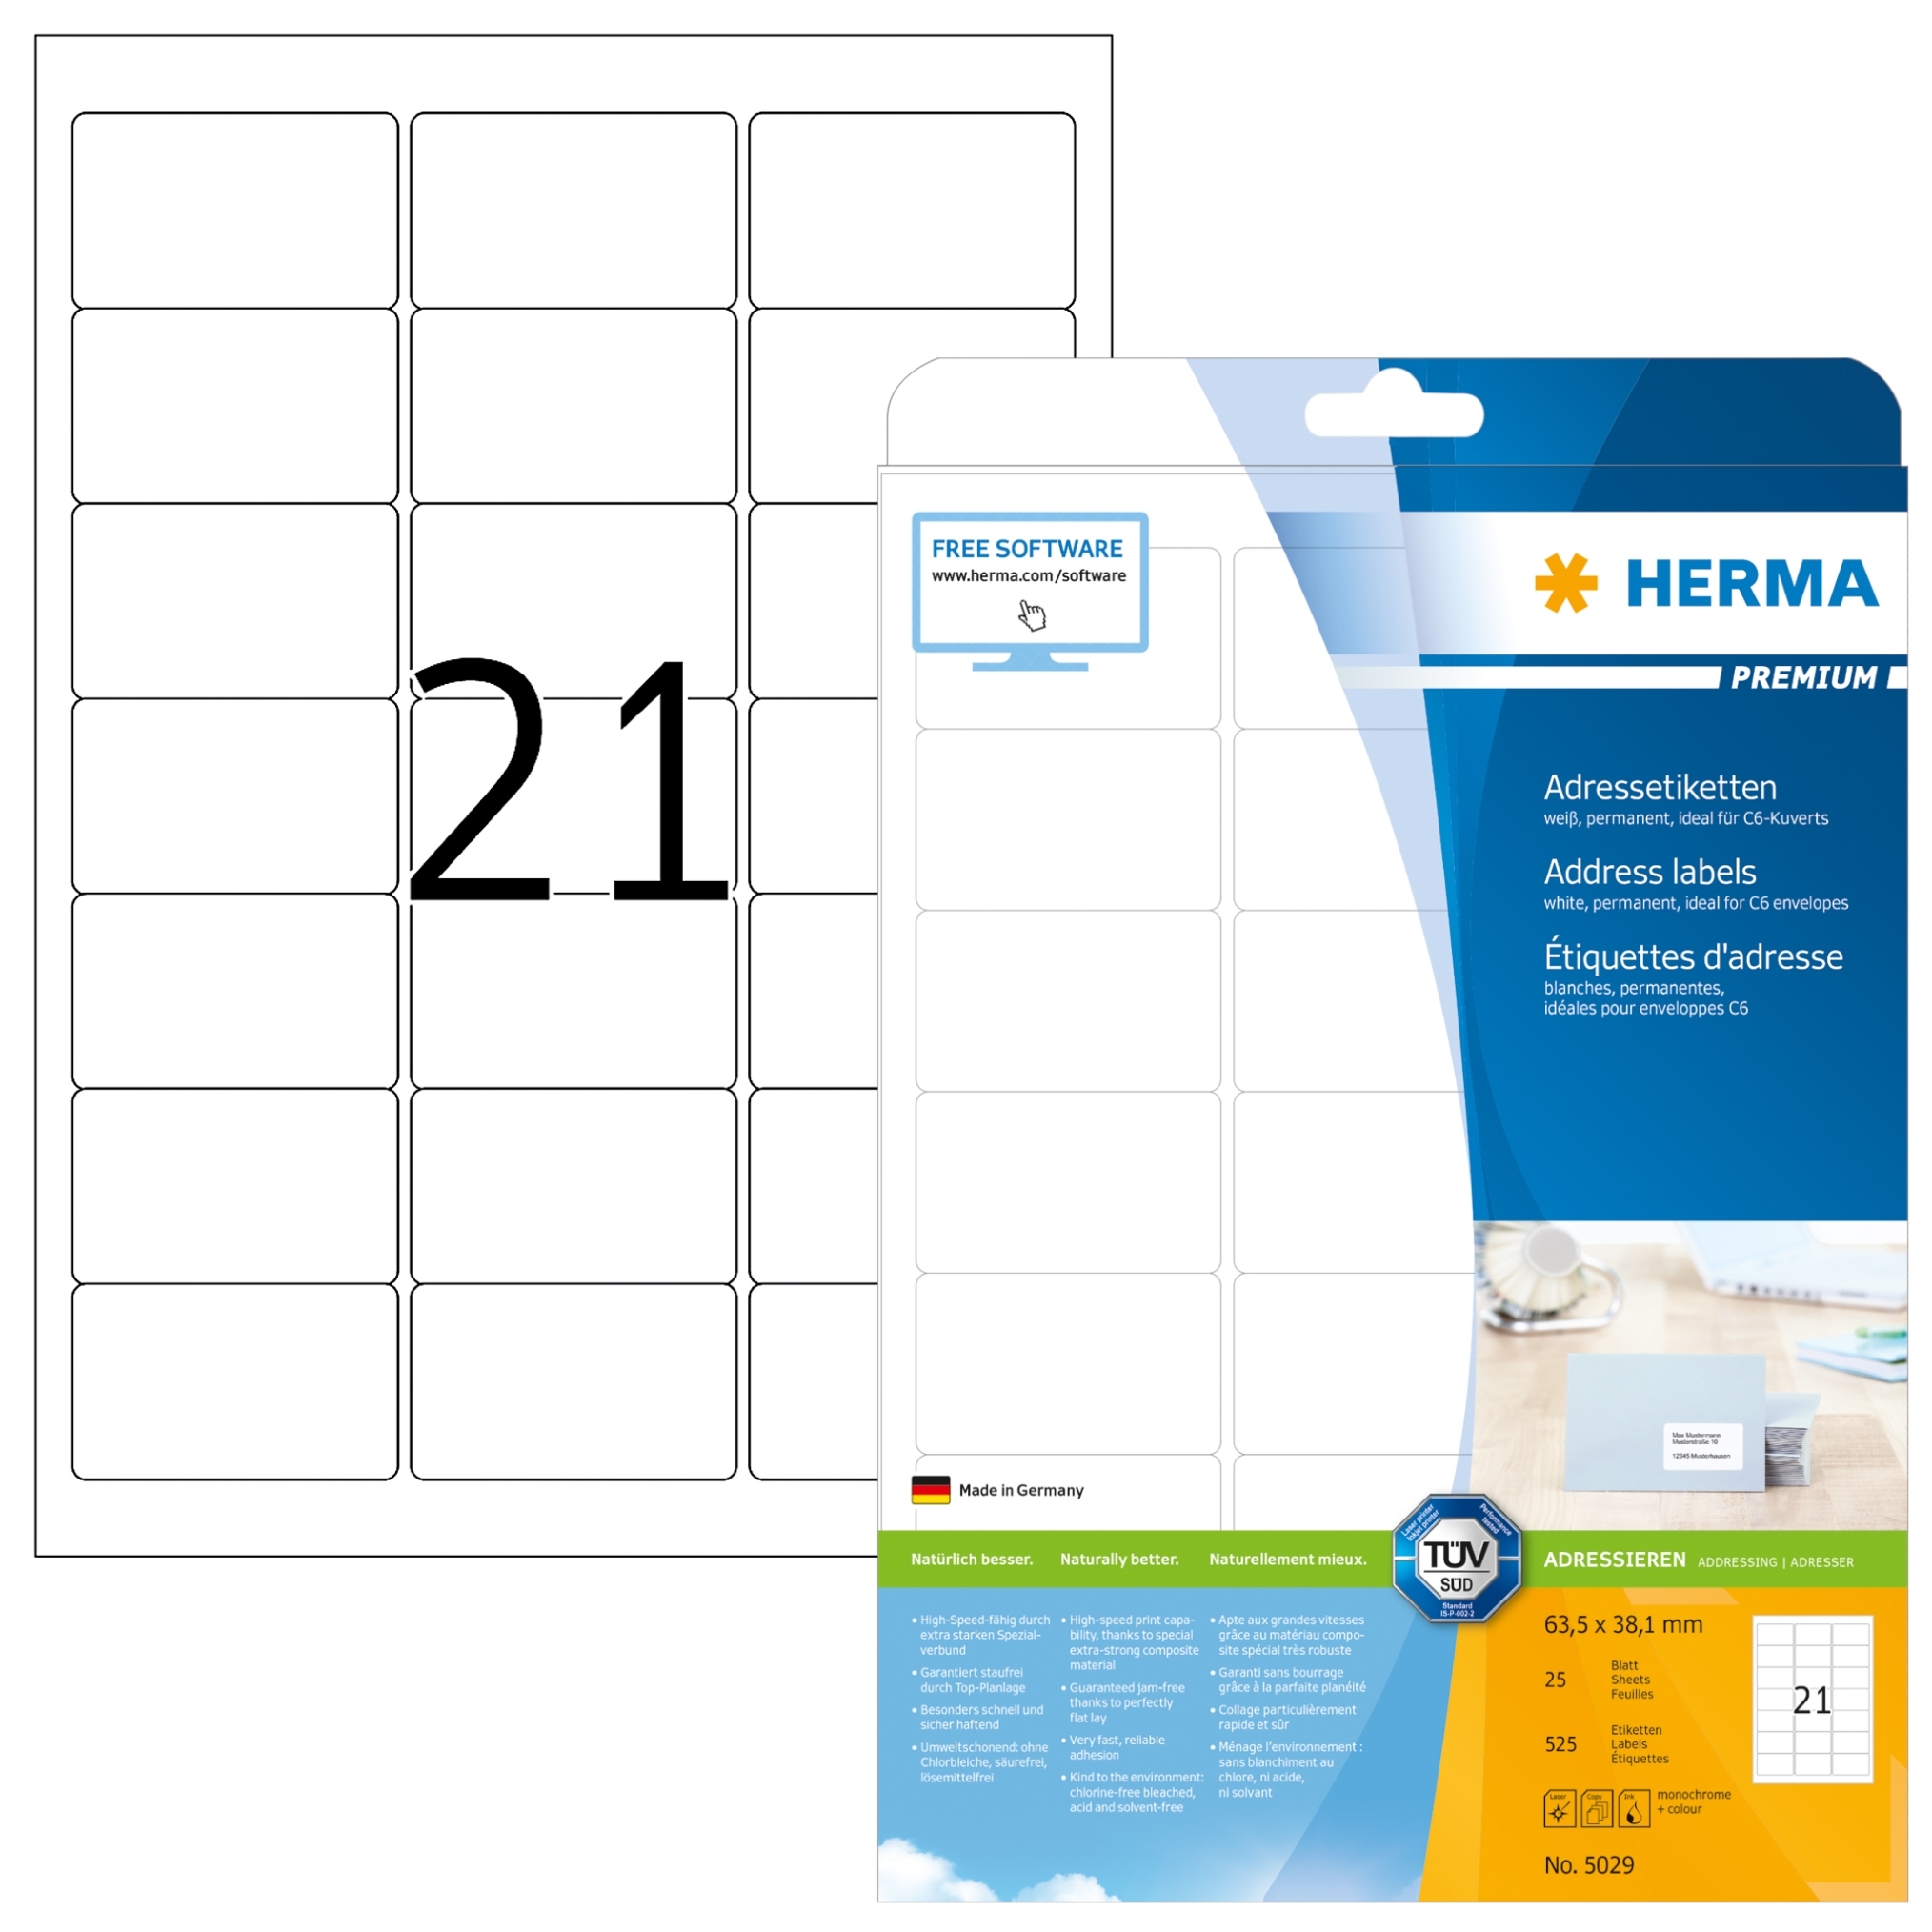 Print On To 21 Labels Per Sheet – All Label Template Sizes Free Label Pertaining To Label Printing Template 21 Per Sheet